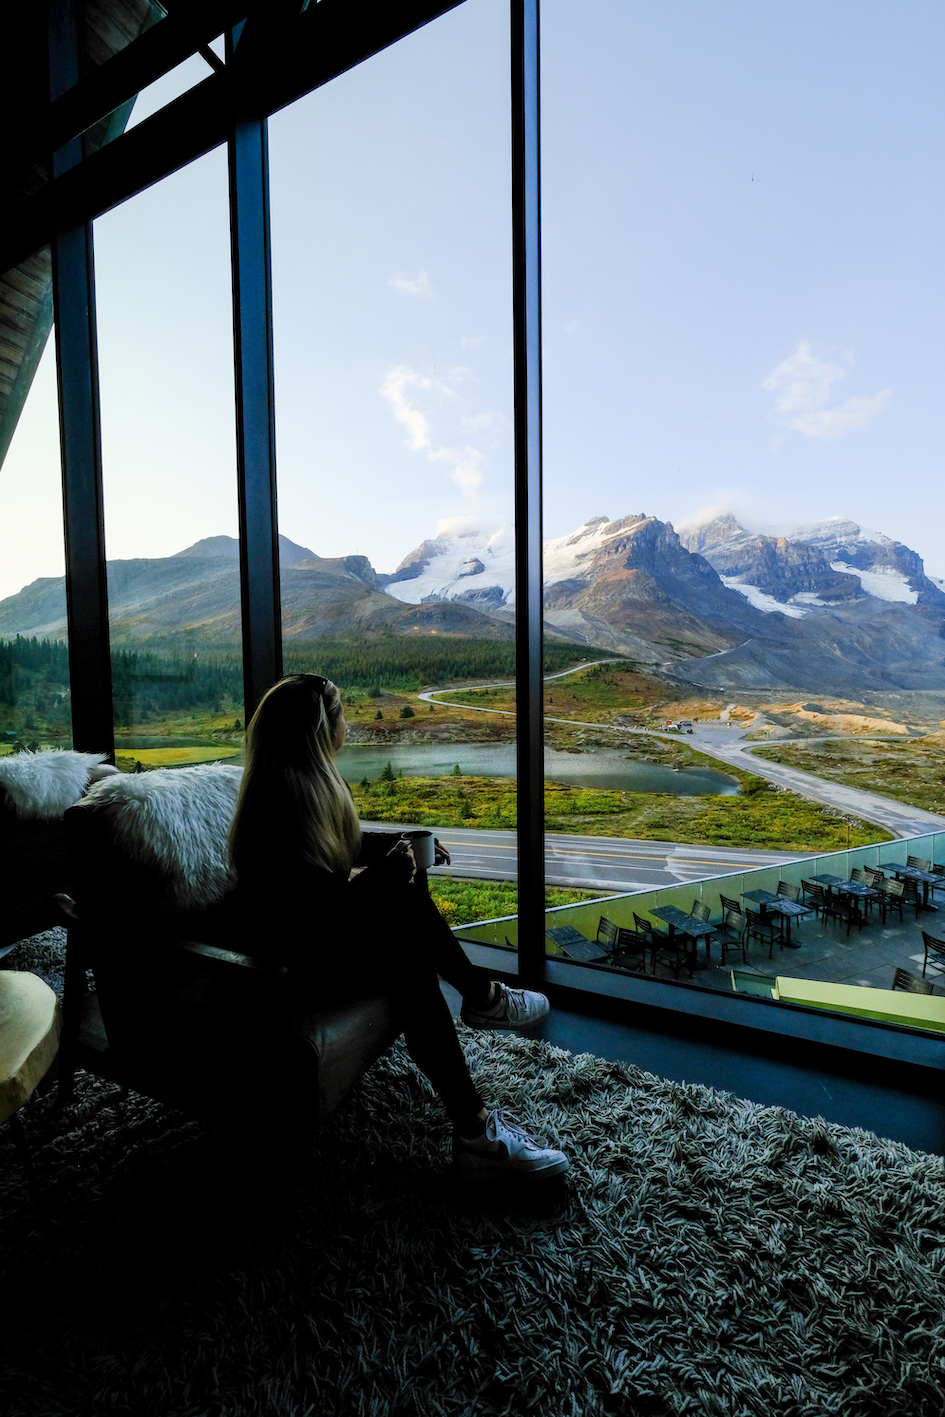 Glacier View Lodge: The Best Icefields Parkway Hotel?